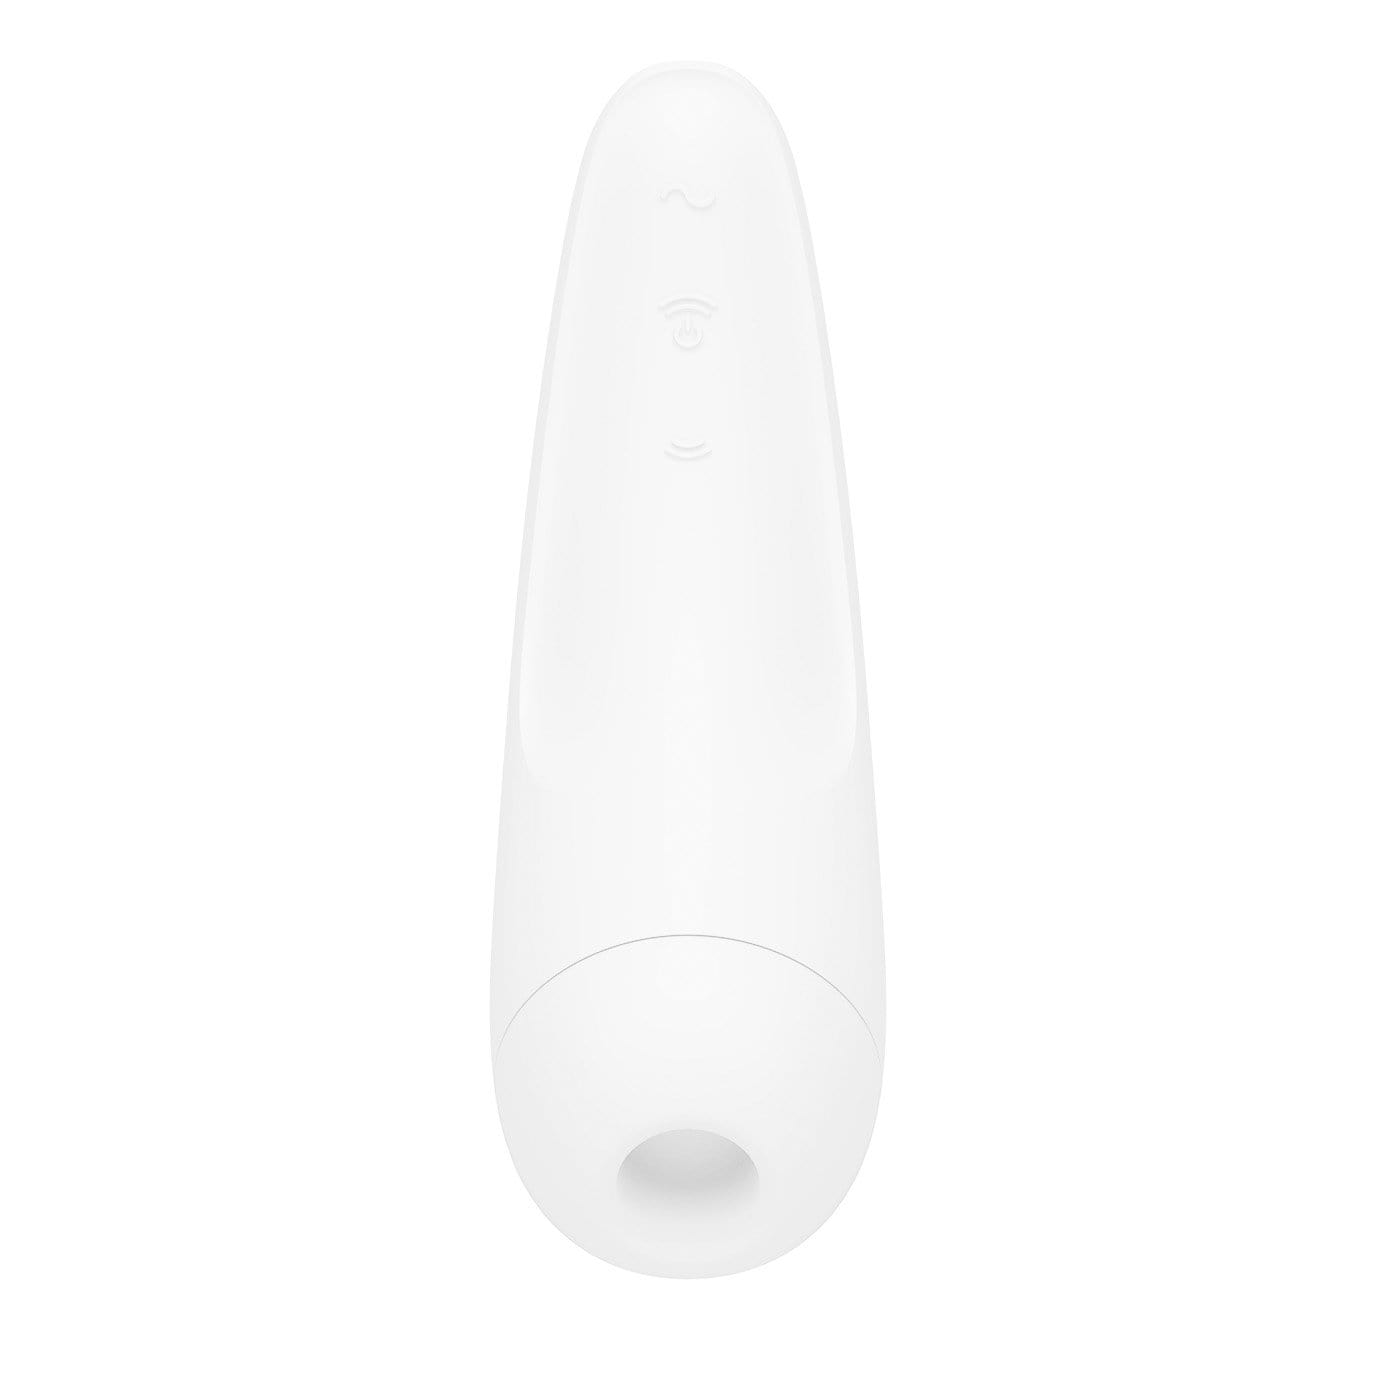 Satisfyer - Curvy 2+ App-Controlled Air Pulse Stimulator Vibrator (White) -  Clit Massager (Vibration) Rechargeable  Durio.sg